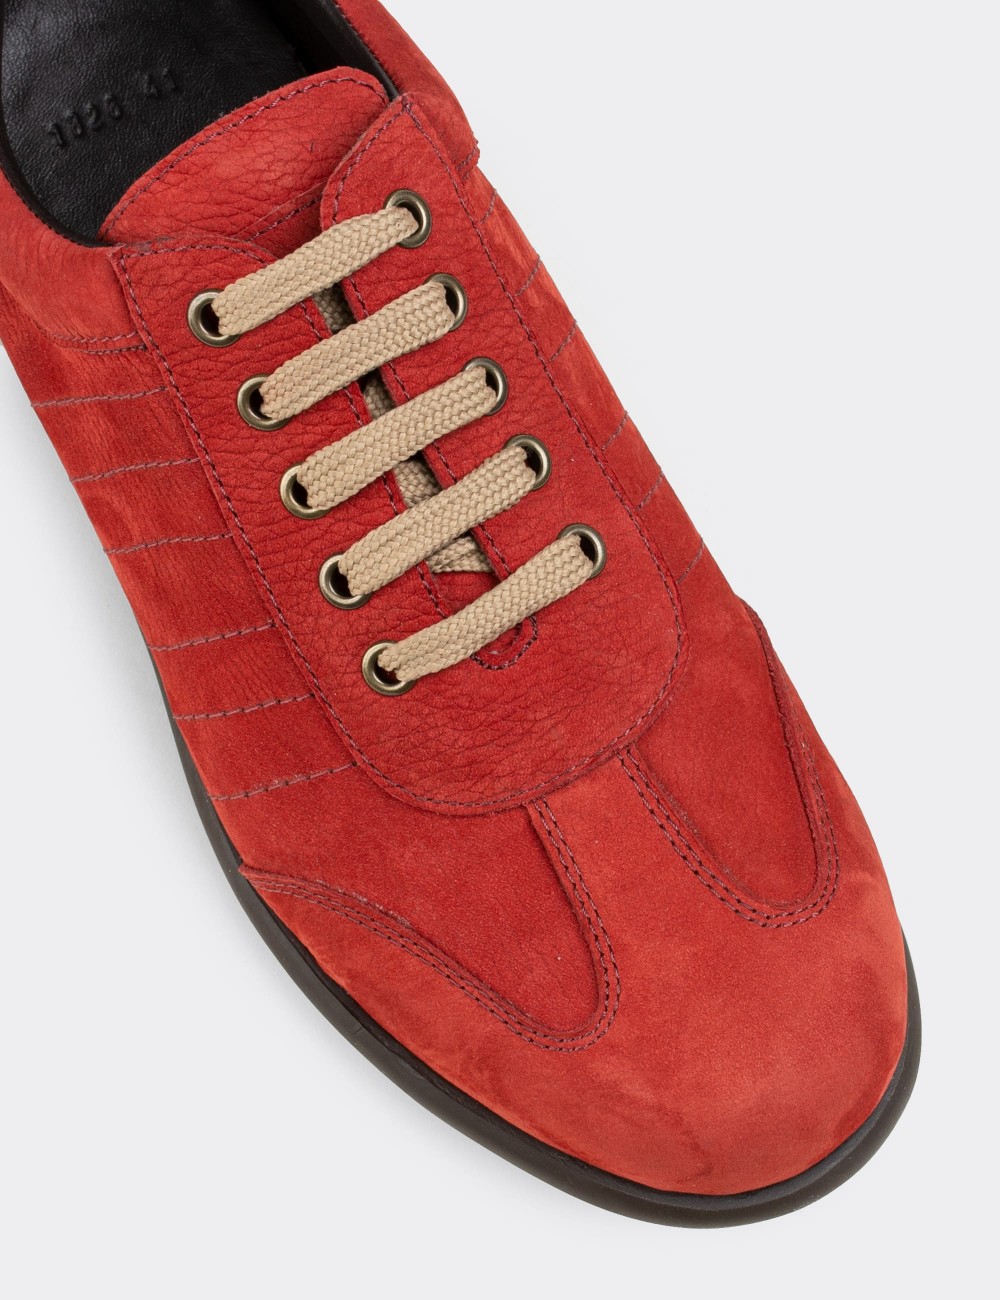 Red Nubuck Leather Lace-up Shoes - 01826MKRMC01